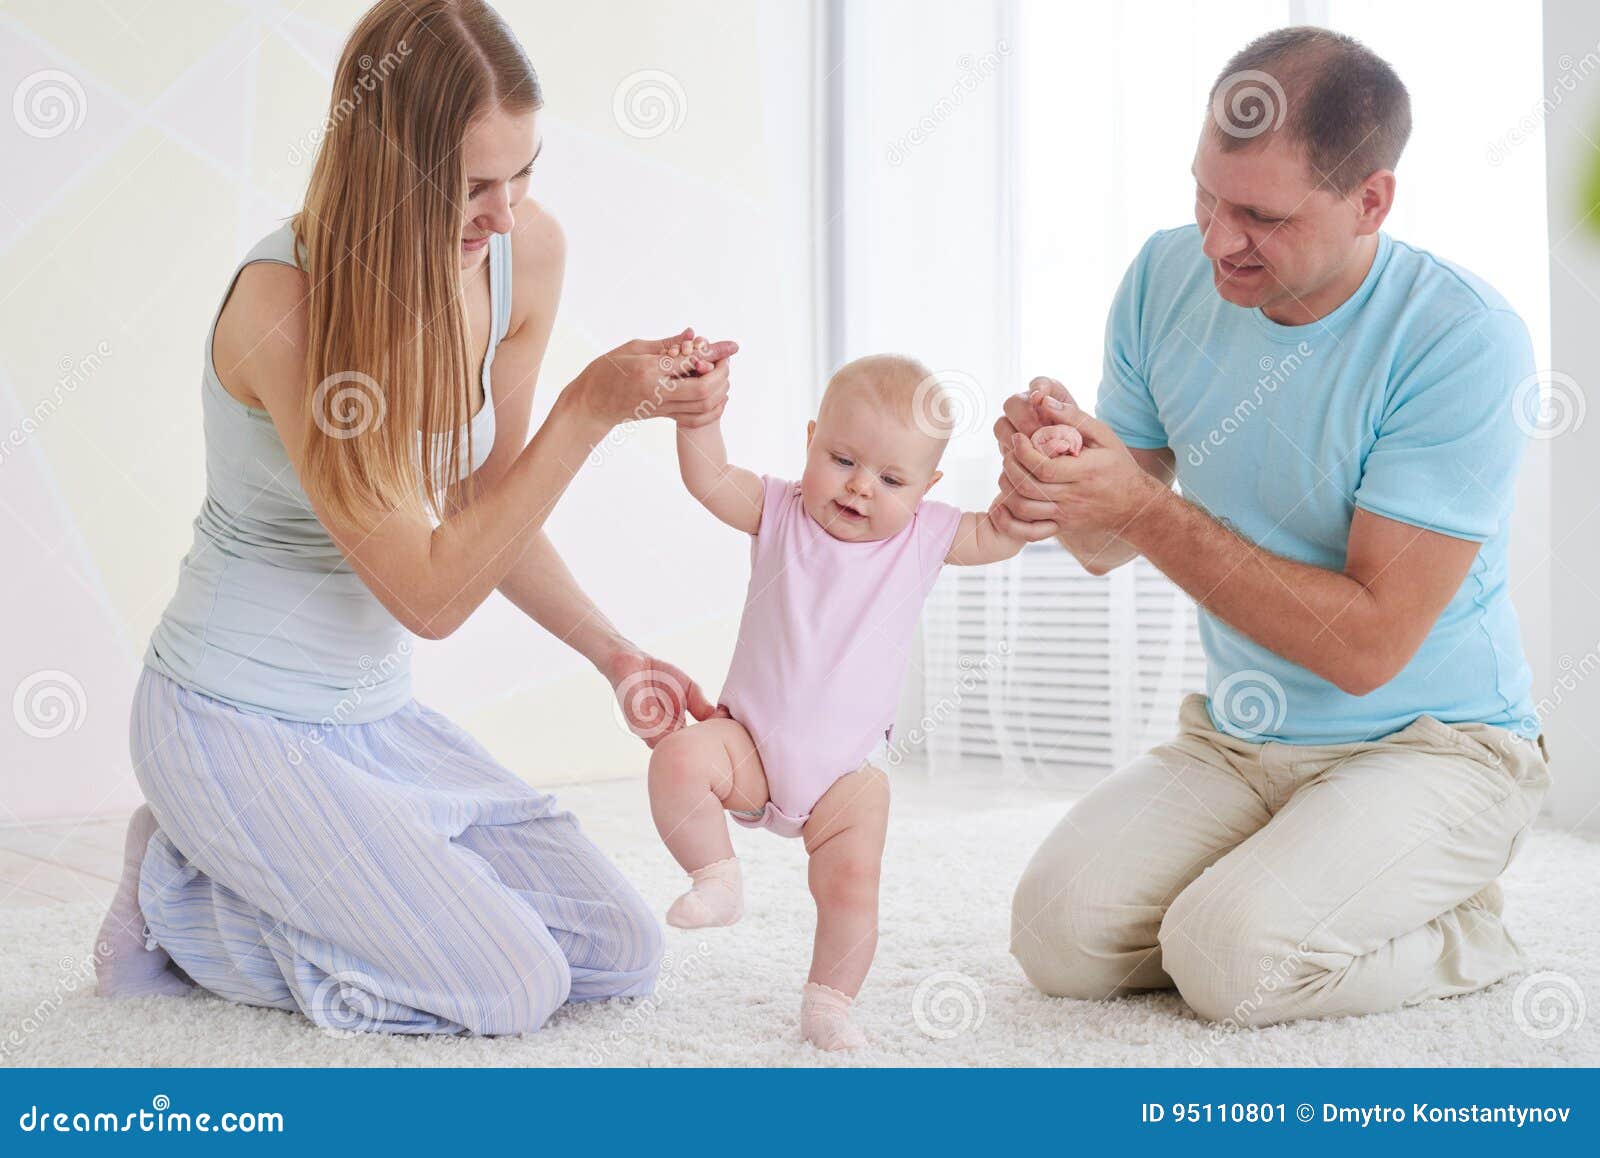 Parents Teaching Baby To Walk Stock Image Image Of Family People